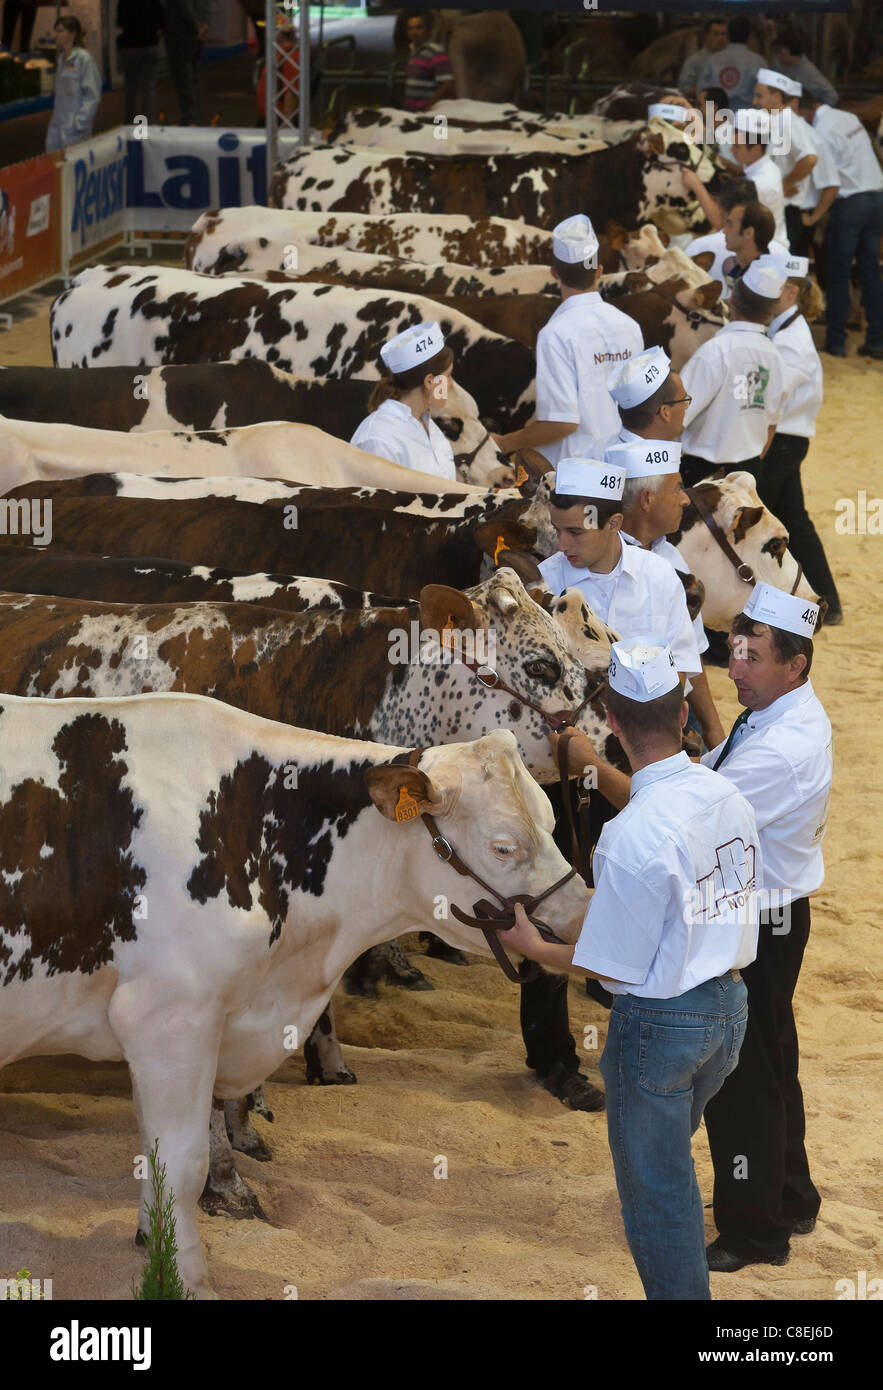 Cows of Normande Breed in competition  at Agriculture show Stock Photo